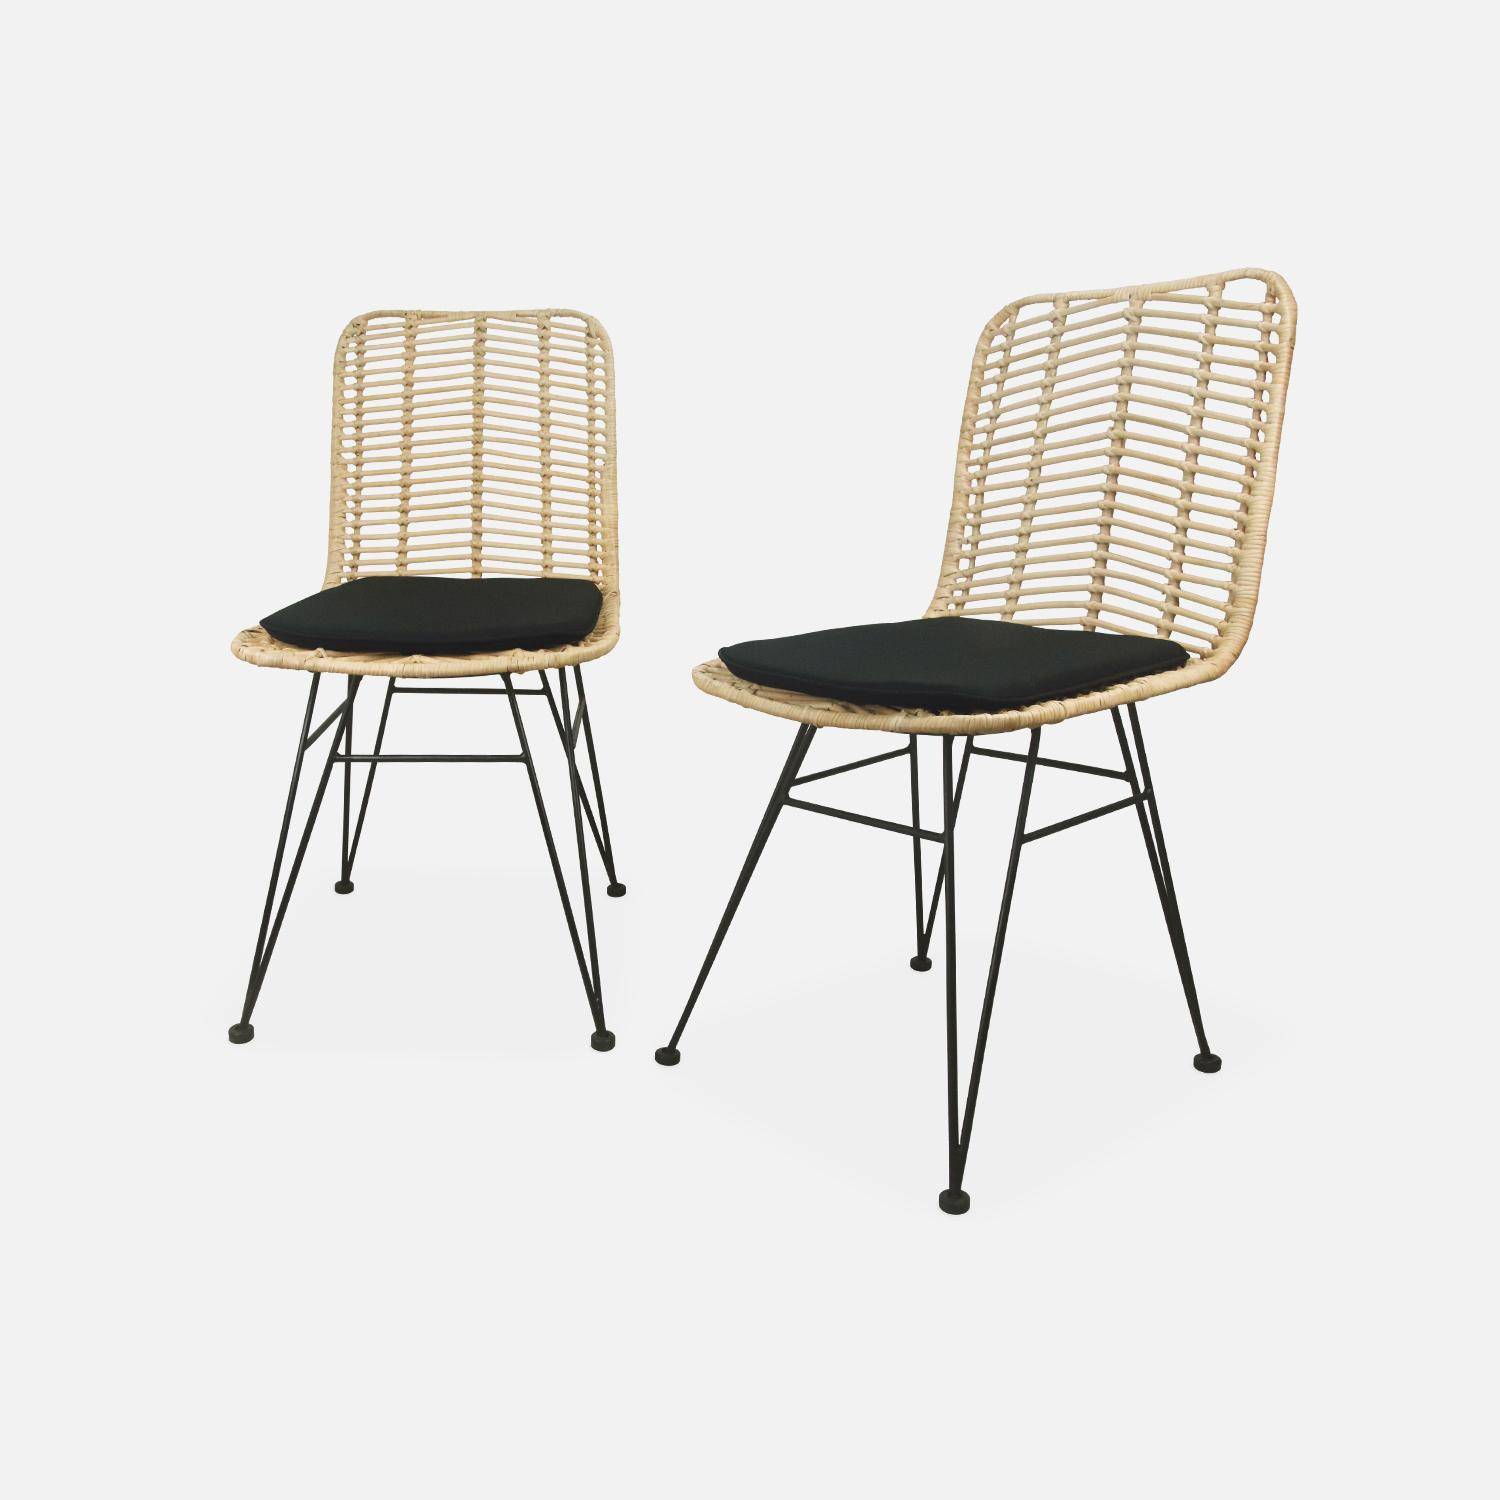 Pair of high-backed rattan dining chairs with metal legs and cushions - Cahya - Natural rattan, Black cushions Photo3